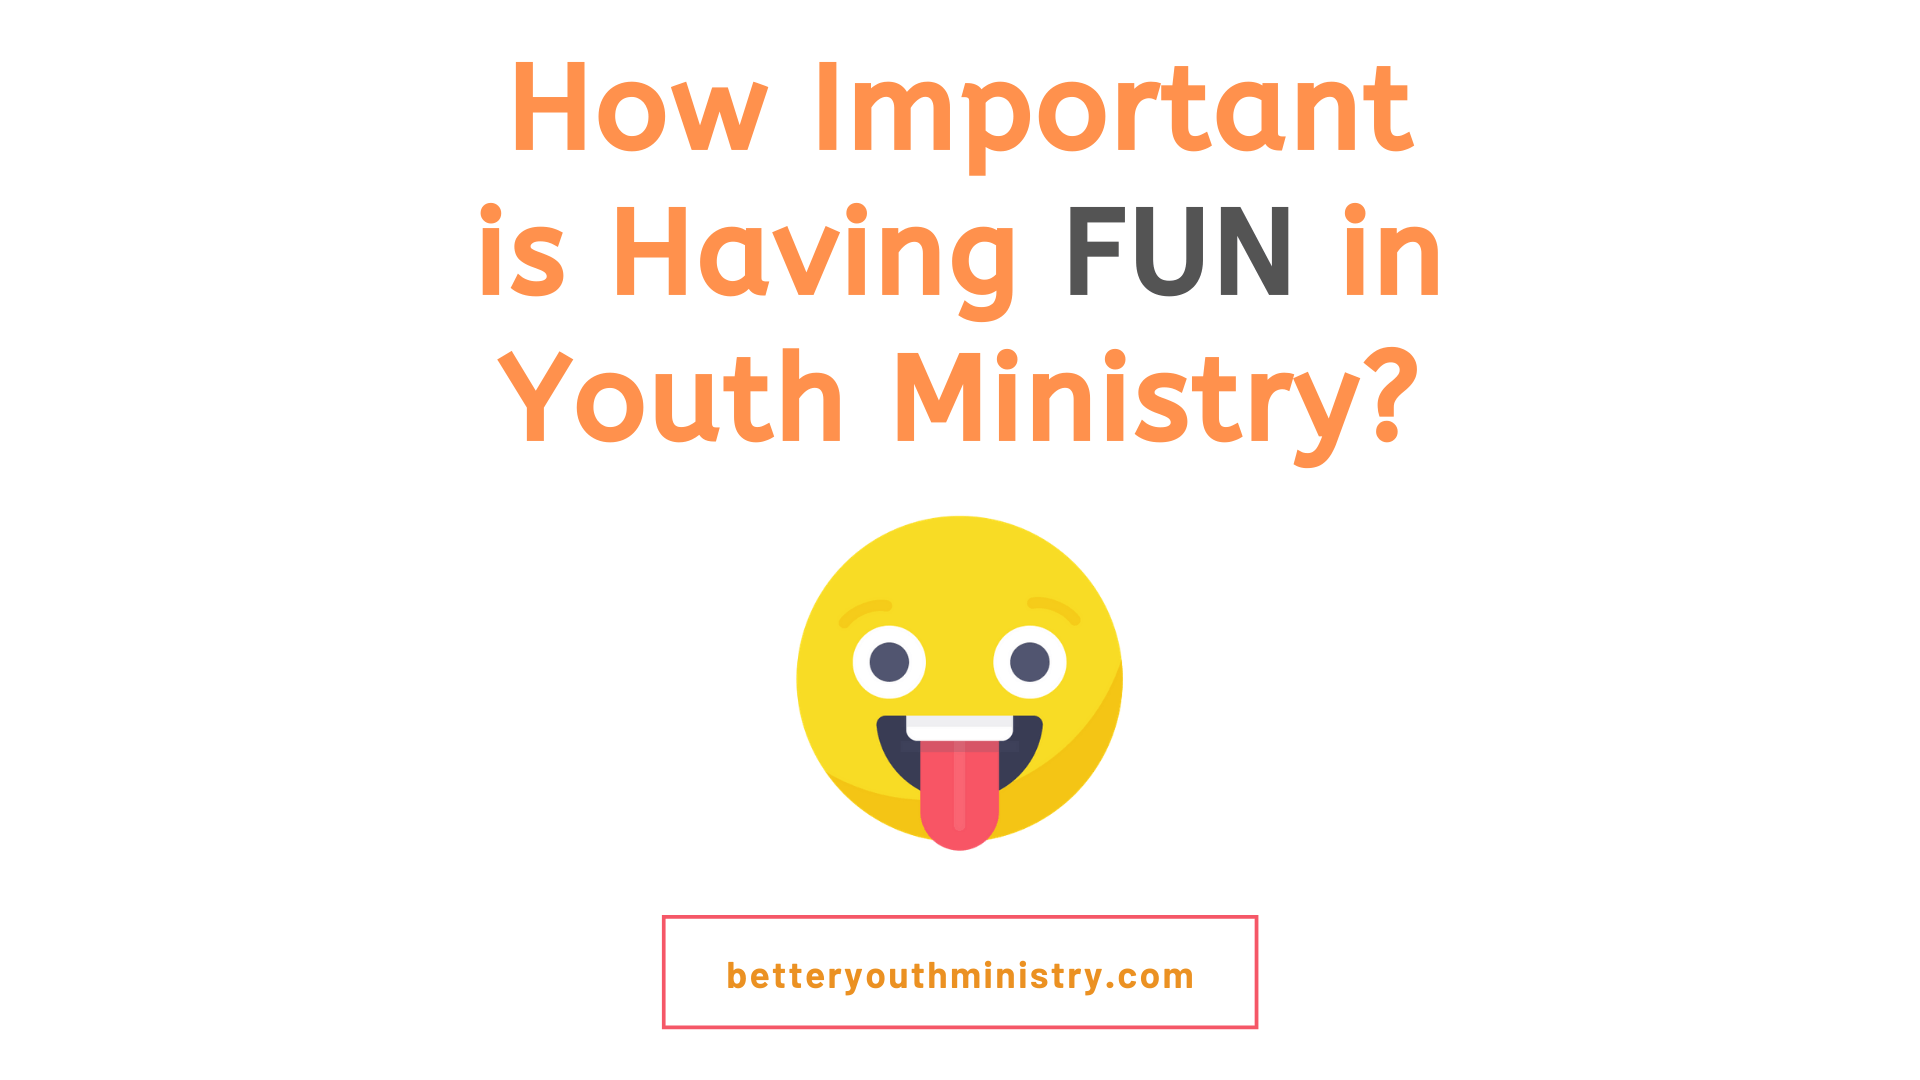 How important is having fun in youth ministry